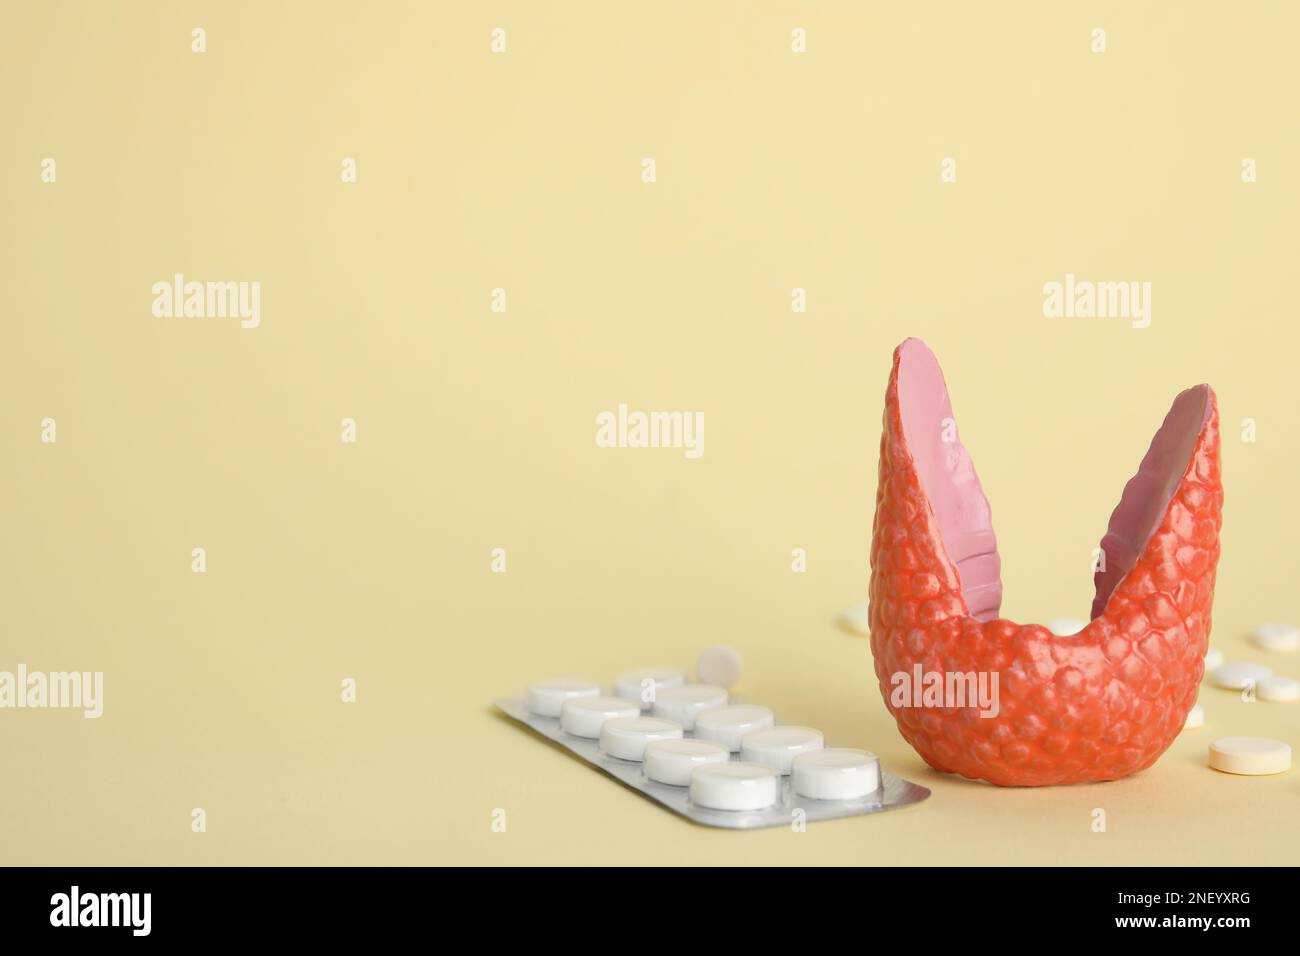 Plastic model of healthy thyroid and pills on beige background, space for text Stock Photo